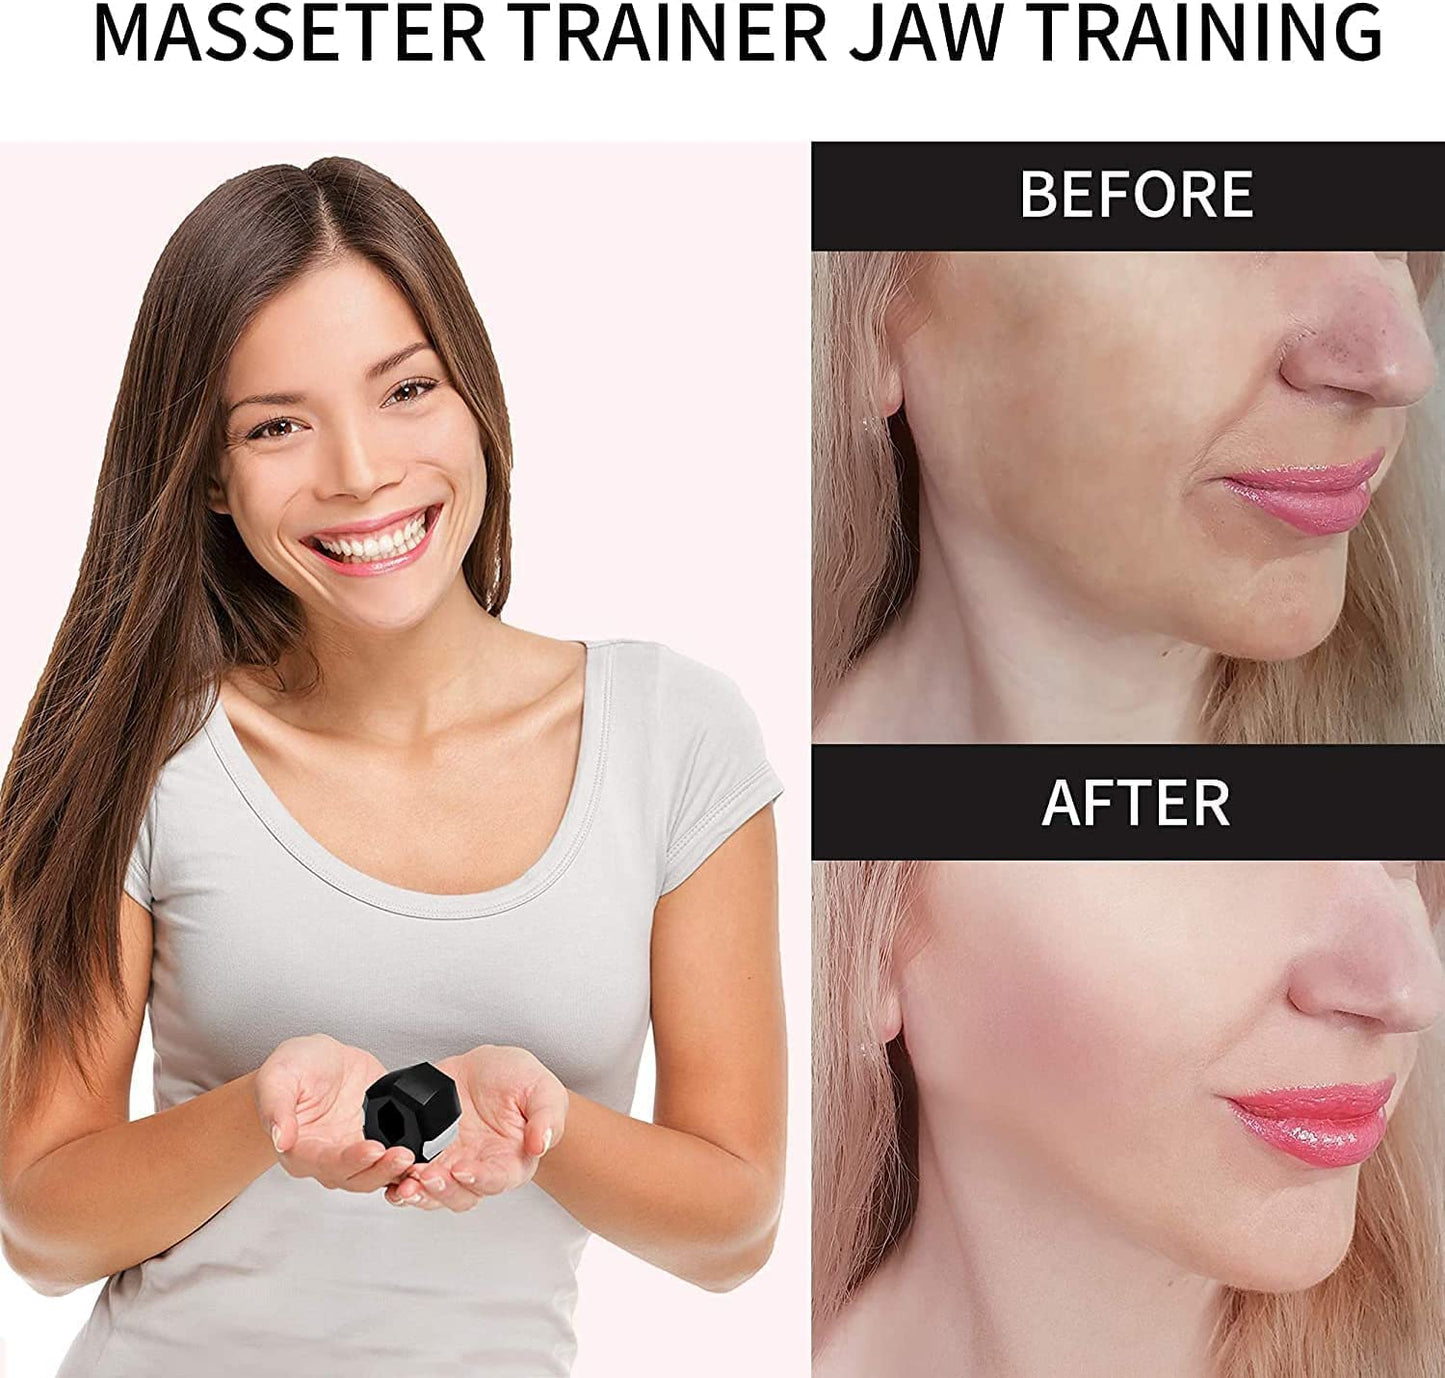 Jaw Exerciser, Face and Neck Exerciser, Jaw Exerciser and Neck Toning, Double Chin Reducer, Define Your Jawline, Slim and Tone Your Face, Repair Flabby Skin, for Men and Women Use